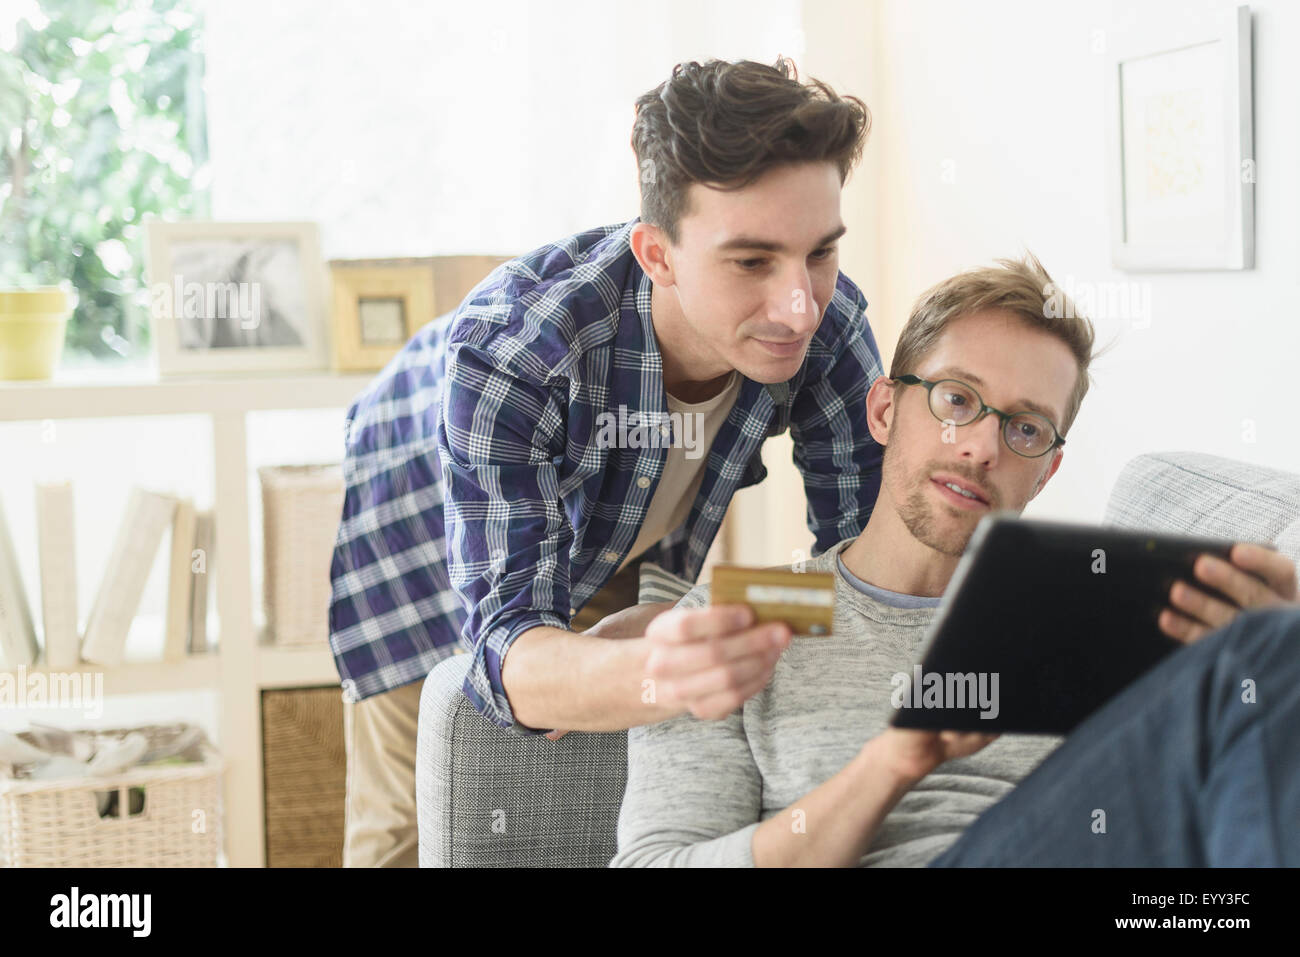 Young gay couple shopping online on digital tablet Banque D'Images